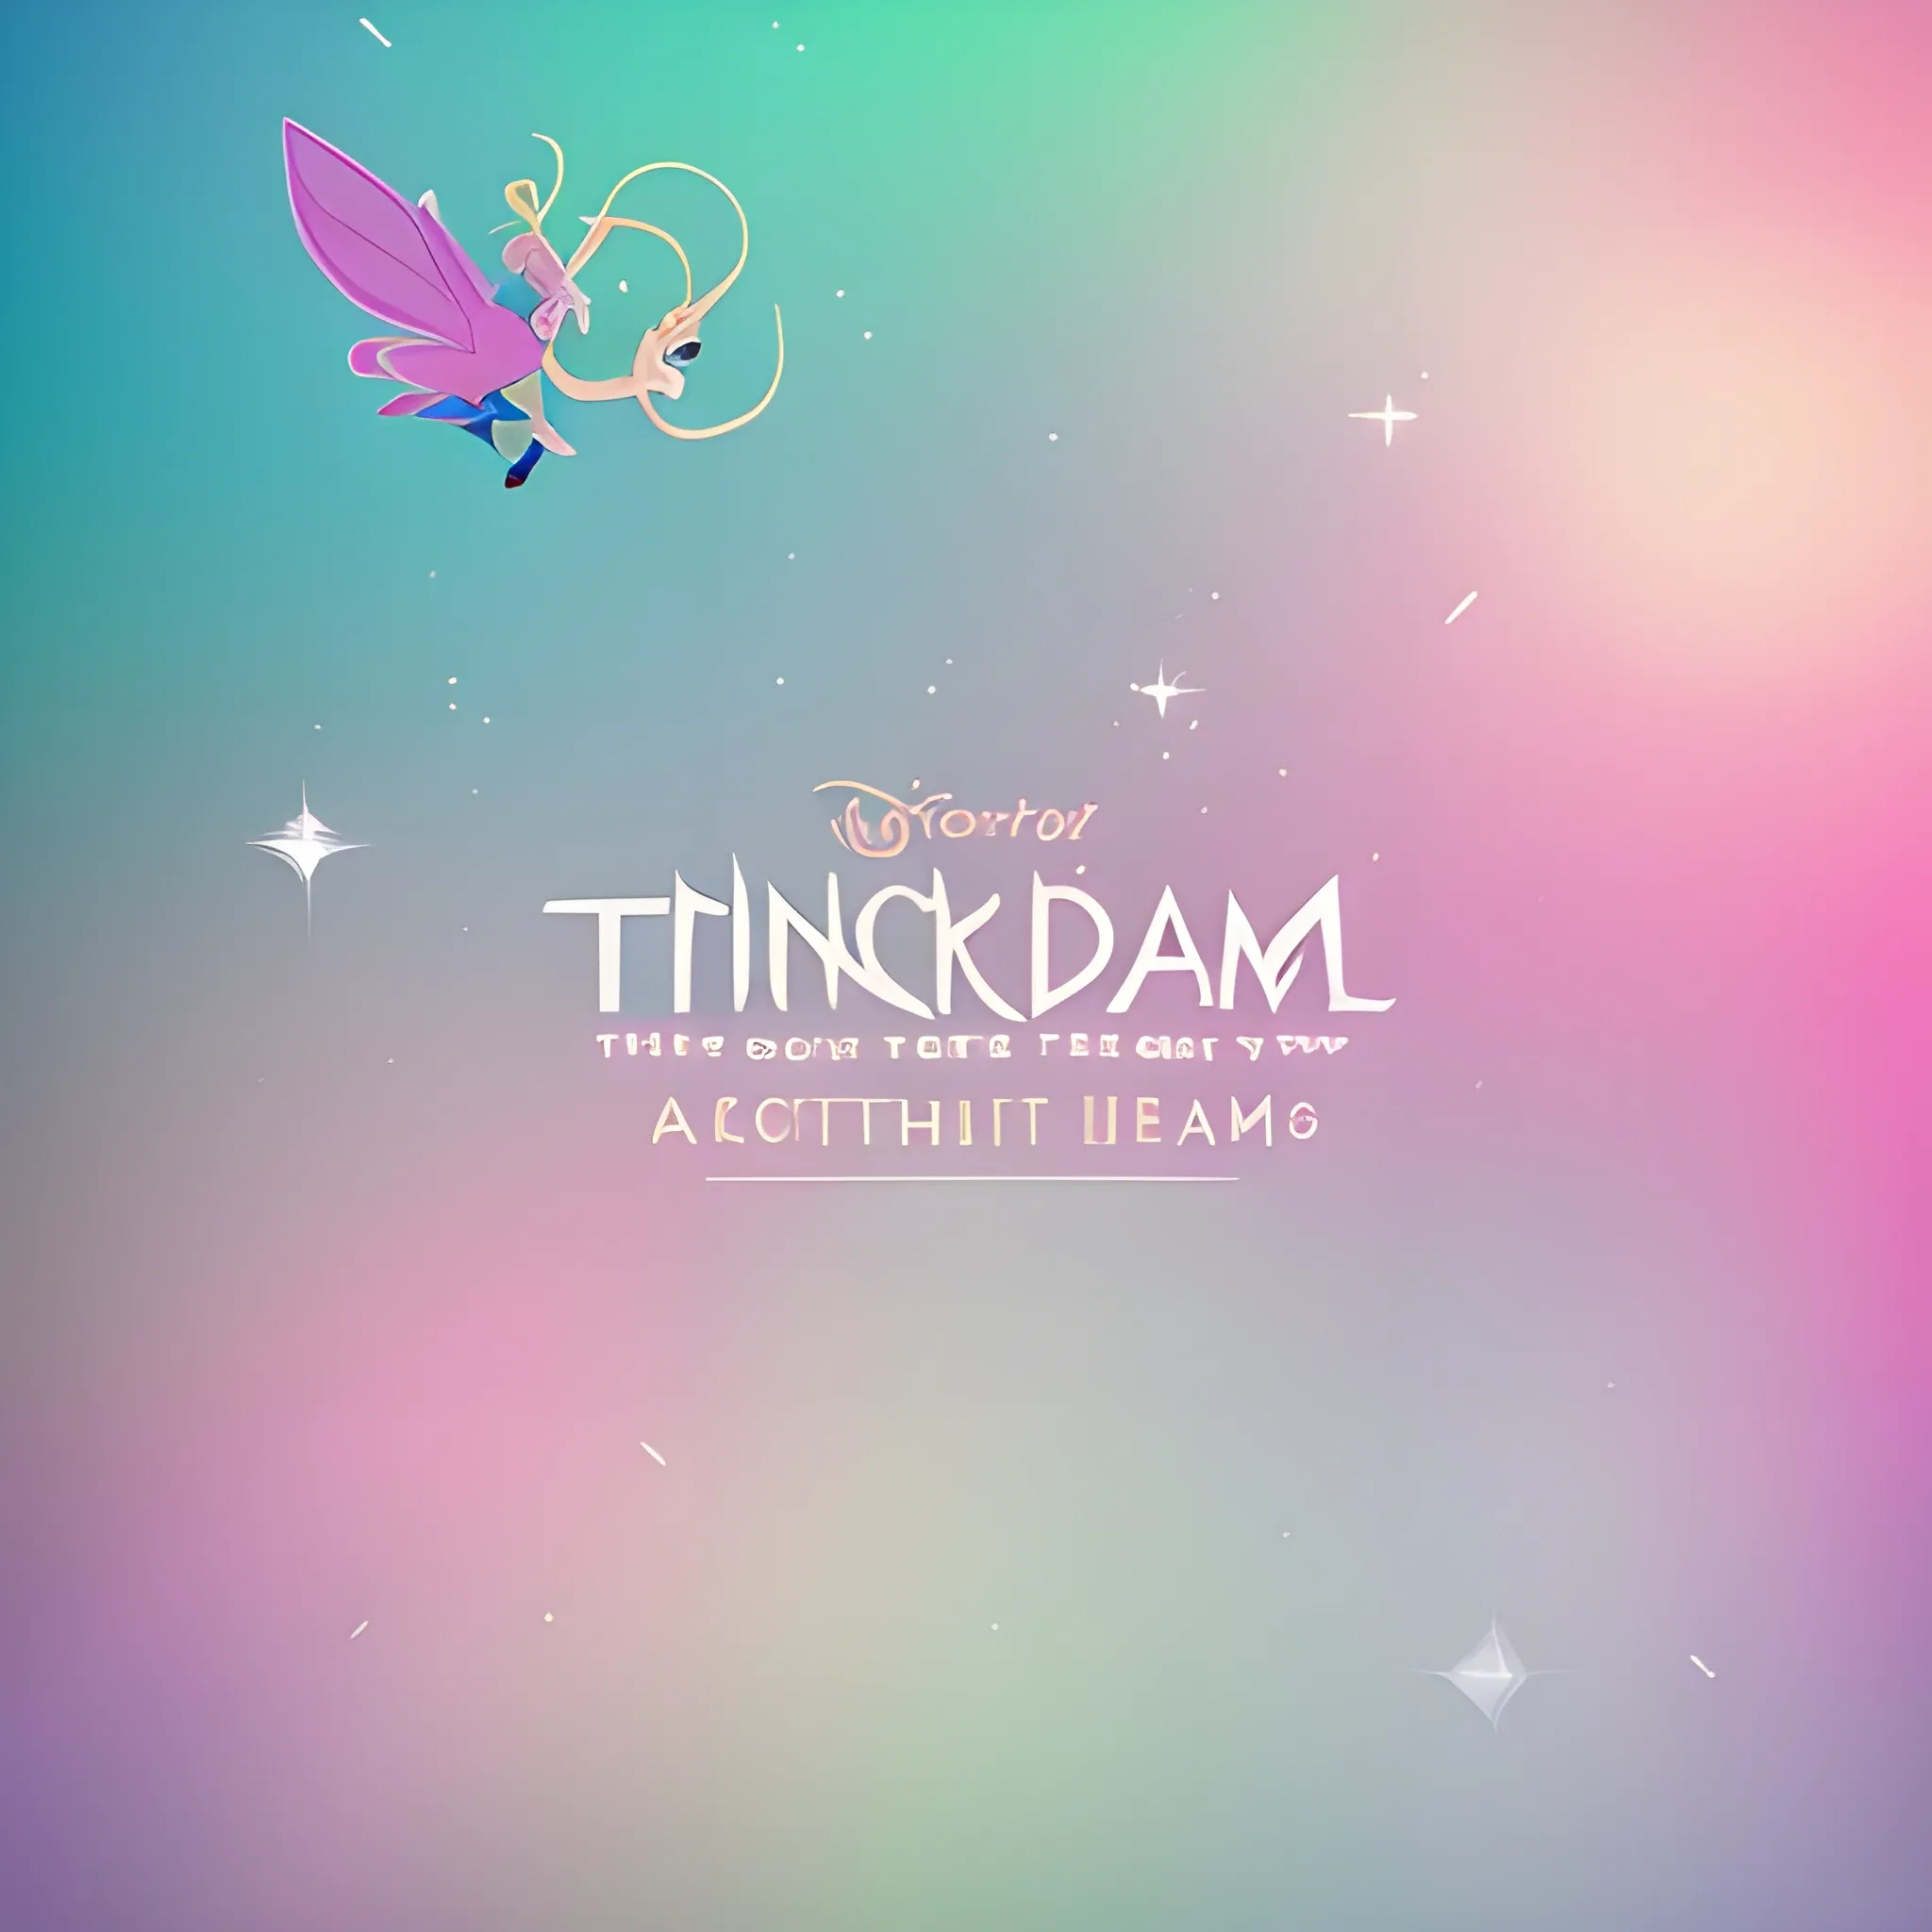 chaotic dream artwork using tinker bell animation movie element in pastel colour scheme. soft focus print designs. 
graphic, animated, 